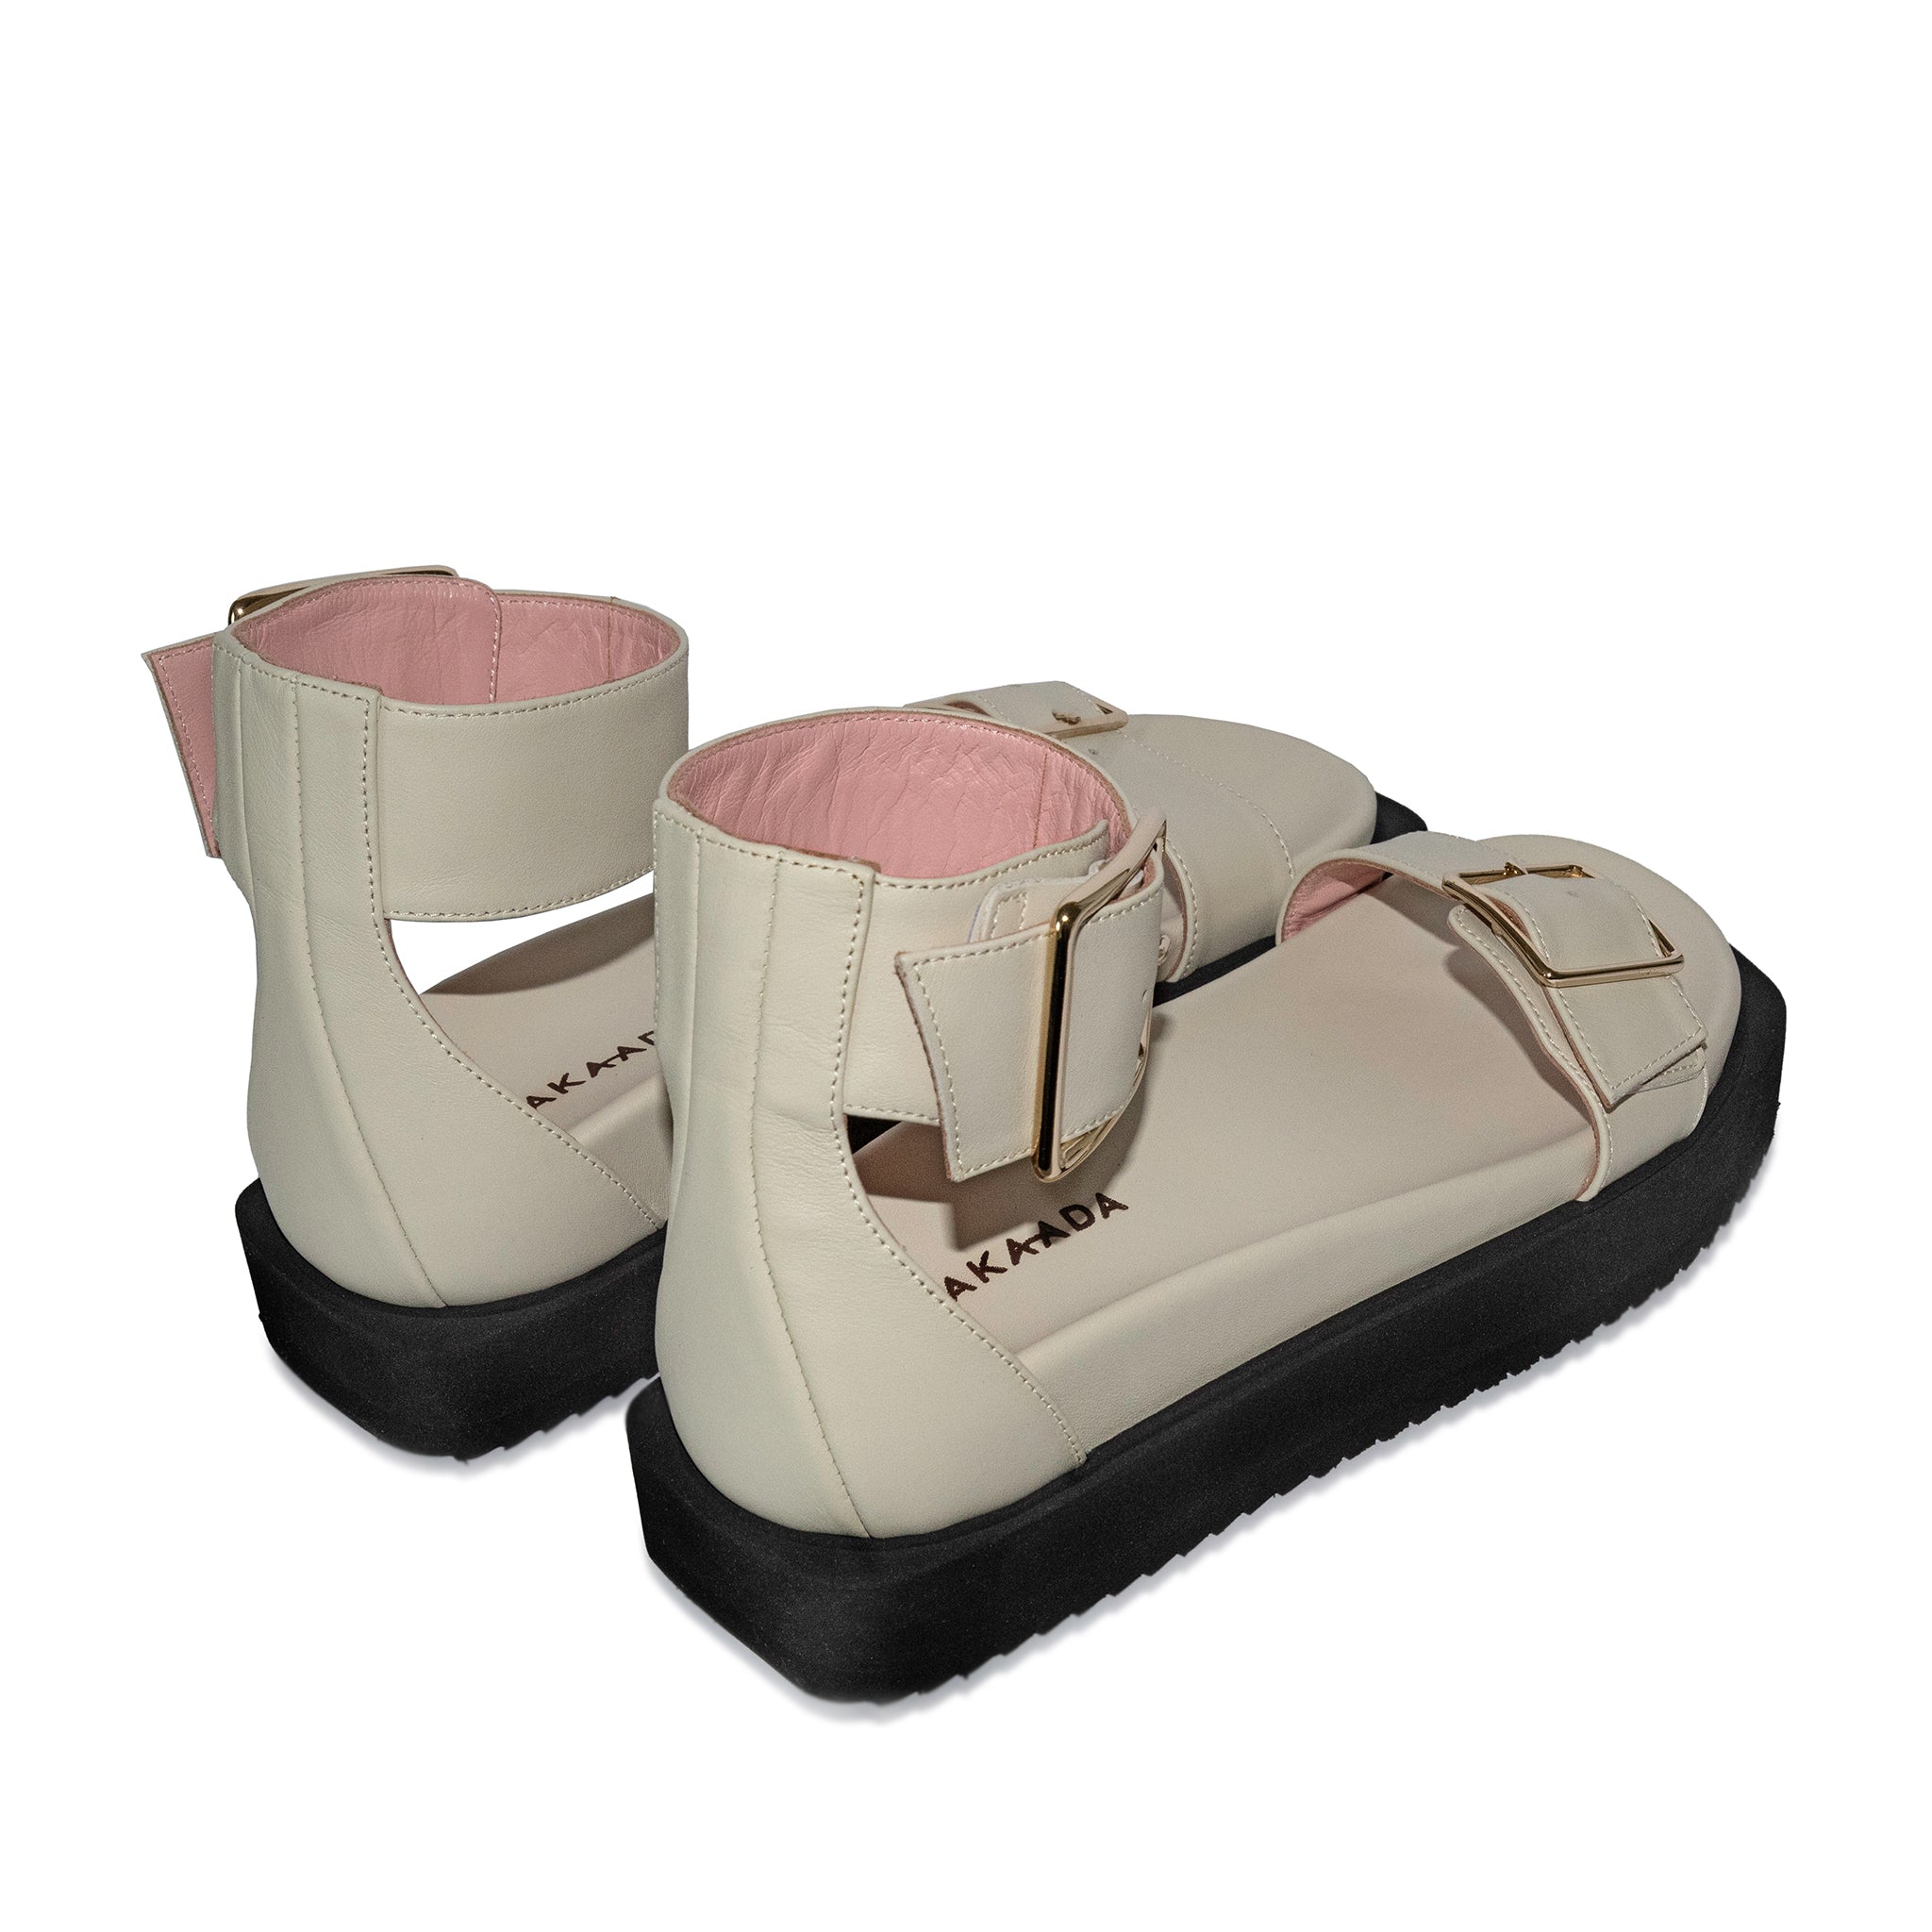 Maru Off White Leather Sandals LES7487-OFFWHITE - 4